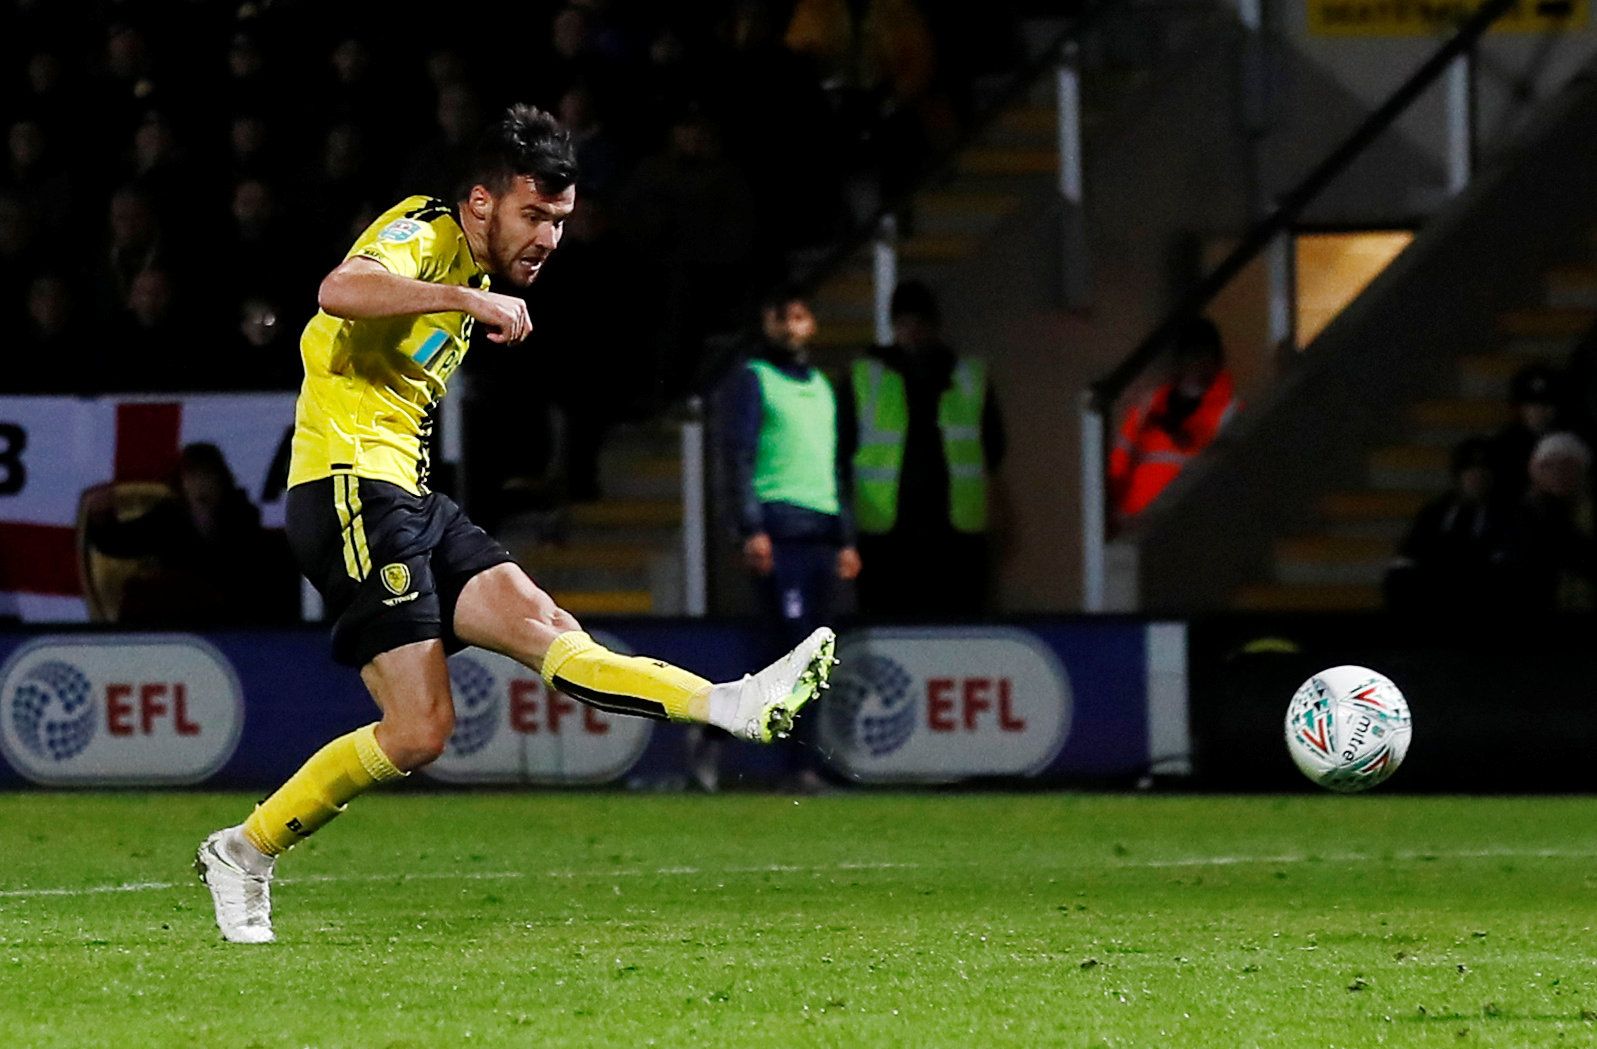 Soccer Football - Carabao Cup Fourth Round - Burton Albion v Nottingham Forest - Pirelli Stadium, Burton-on-Trent, Britain - October 30, 2018   Burton Albion's Scott Fraser scores their second goal     Action Images/Jason Cairnduff    EDITORIAL USE ONLY. No use with unauthorized audio, video, data, fixture lists, club/league logos or 